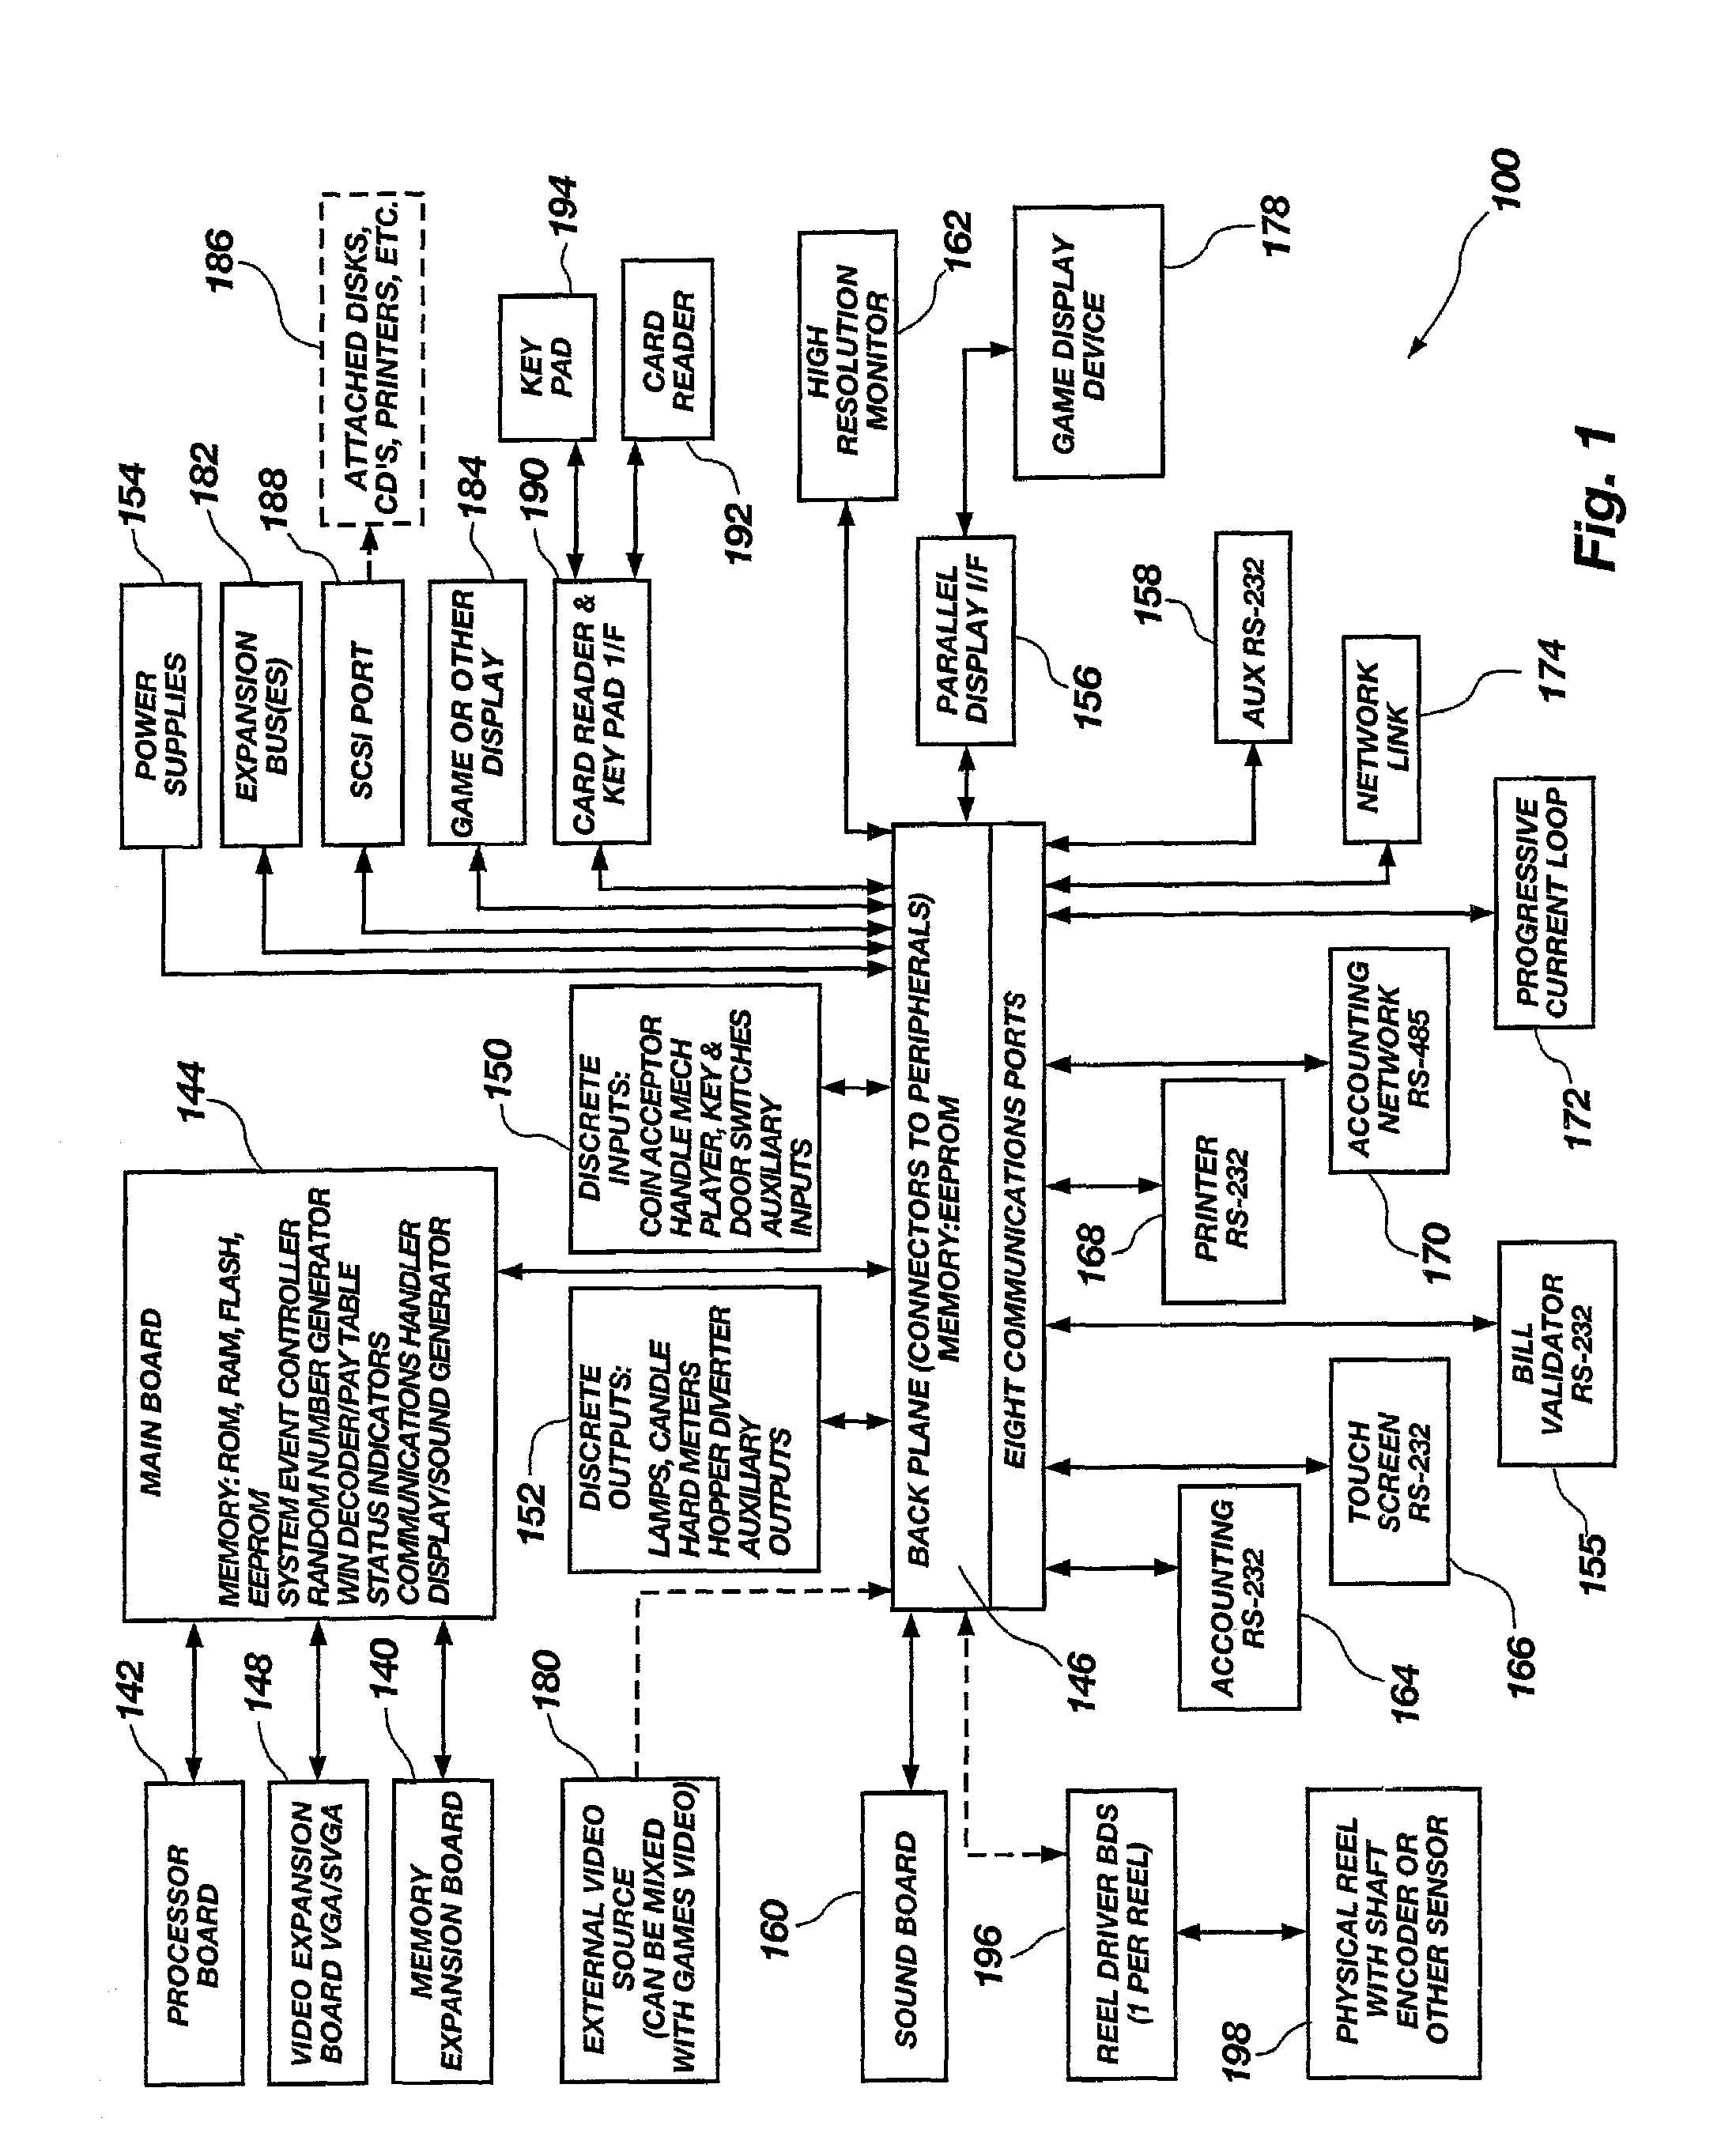 Method and apparatus for providing an advantage to a player in a bonus game